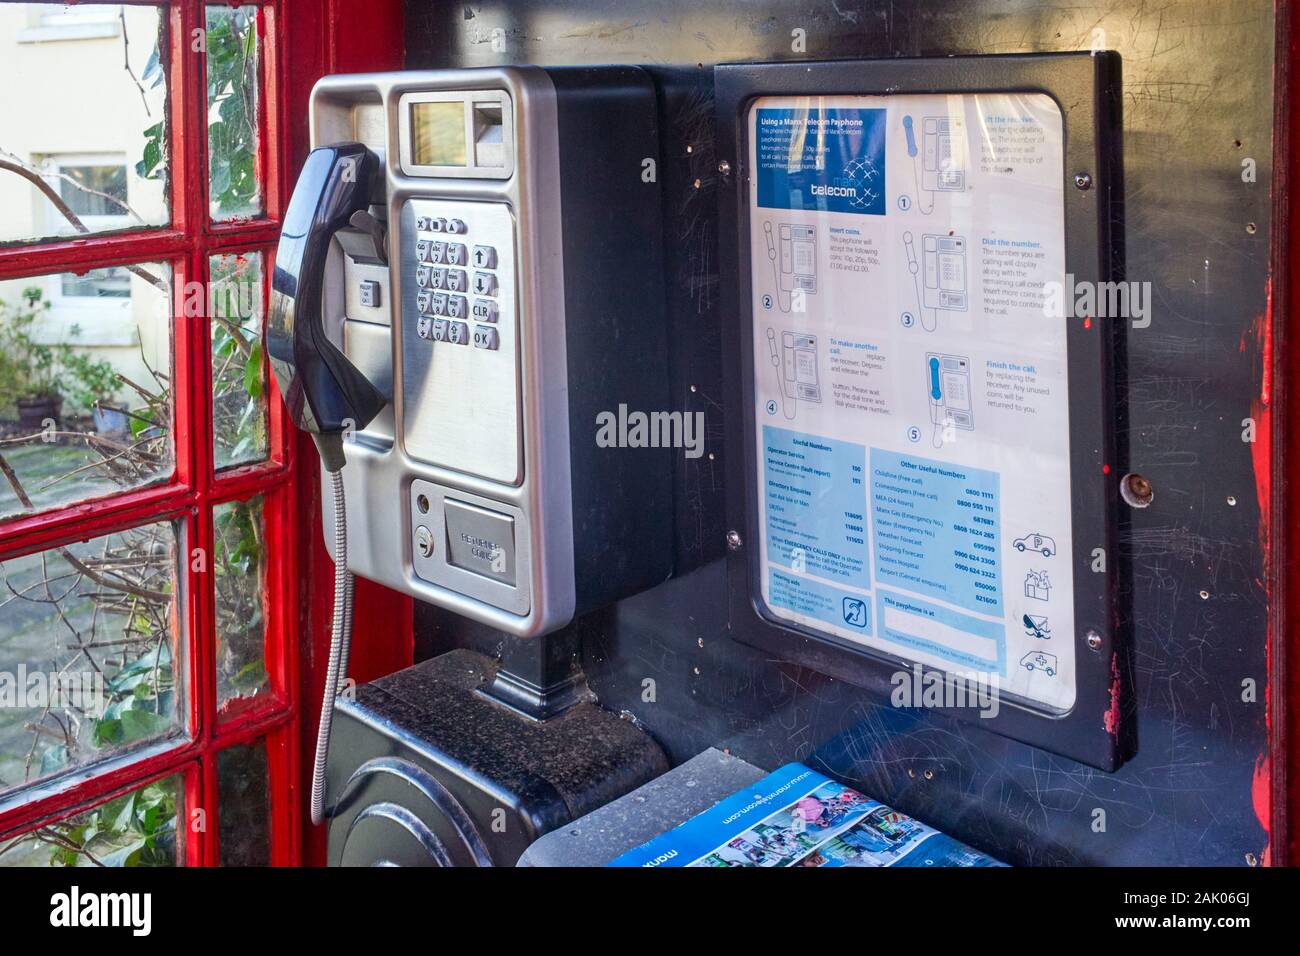 Interior of a red K6 phonebox in Bride village, Isle of Man Stock Photo